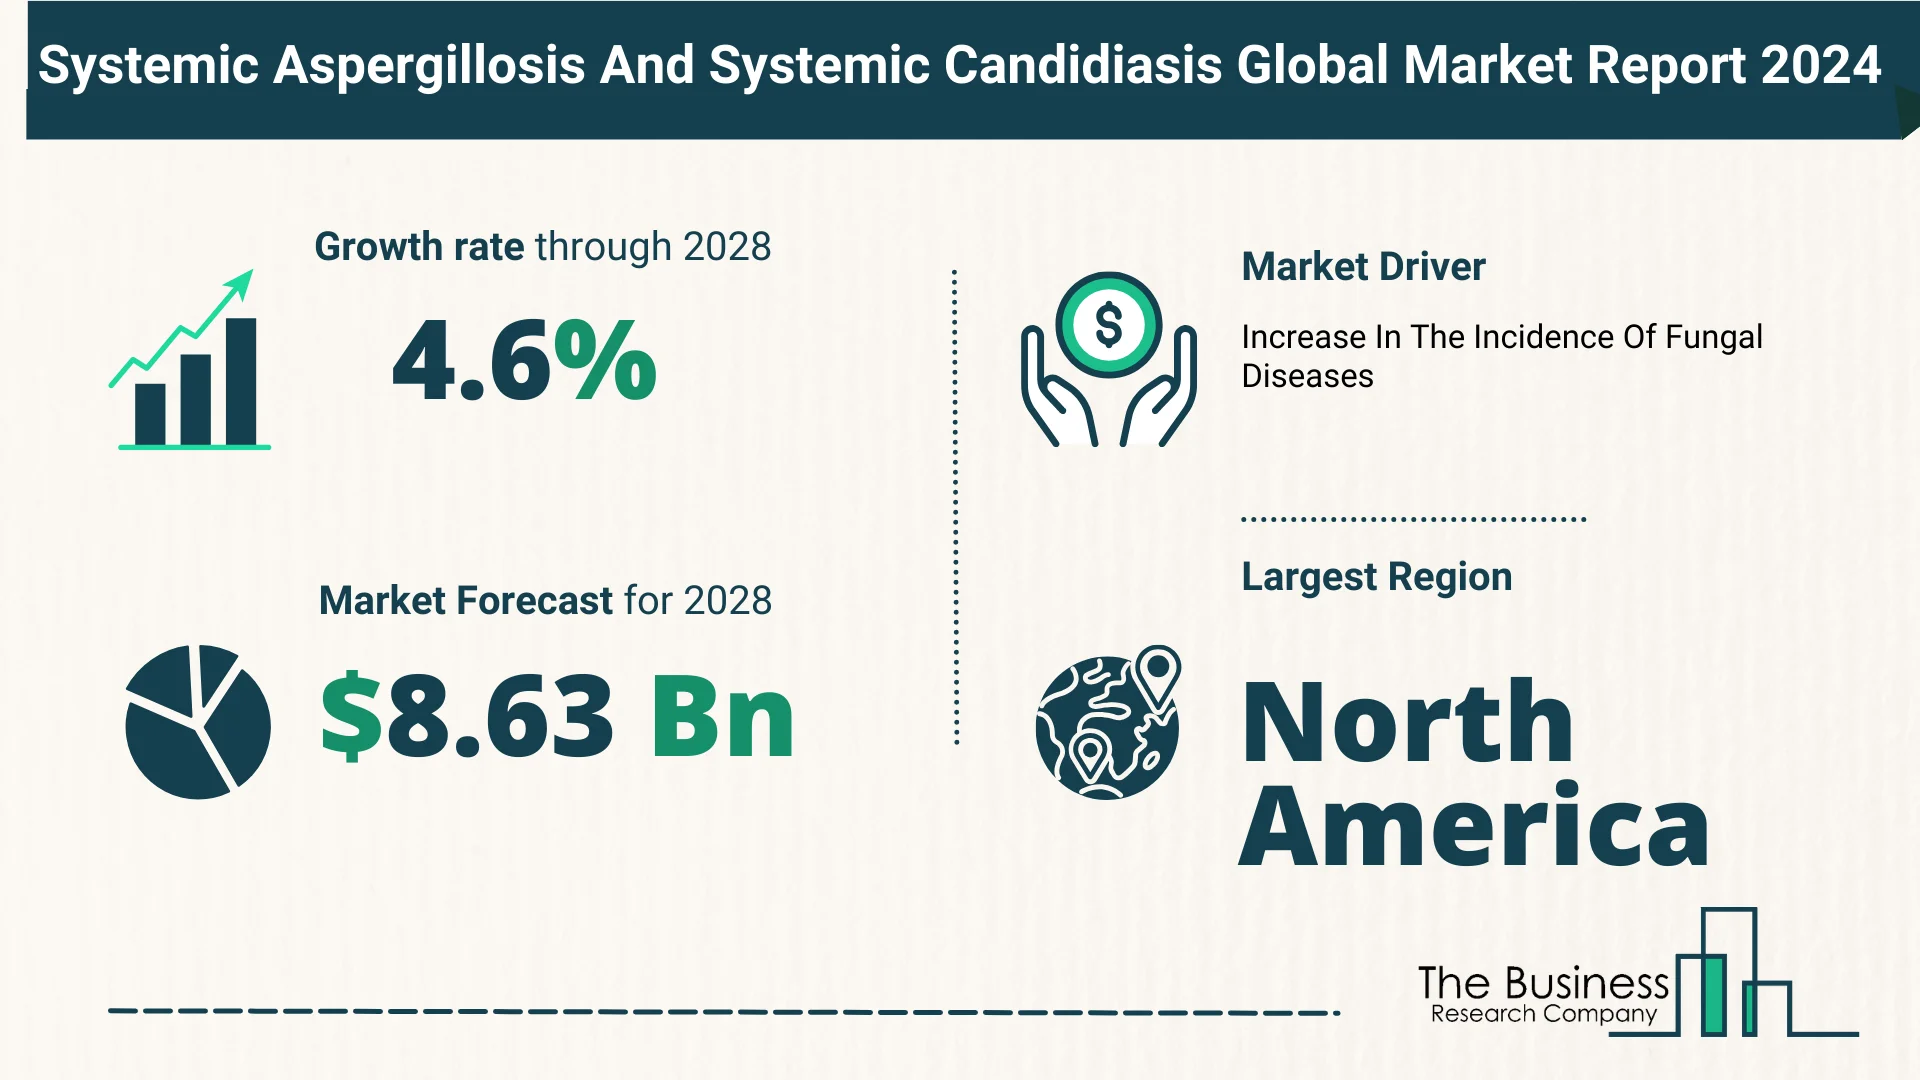 Systemic Aspergillosis And Systemic Candidiasis Market Forecast Until 2033 – Estimated Market Size And Growth Rate